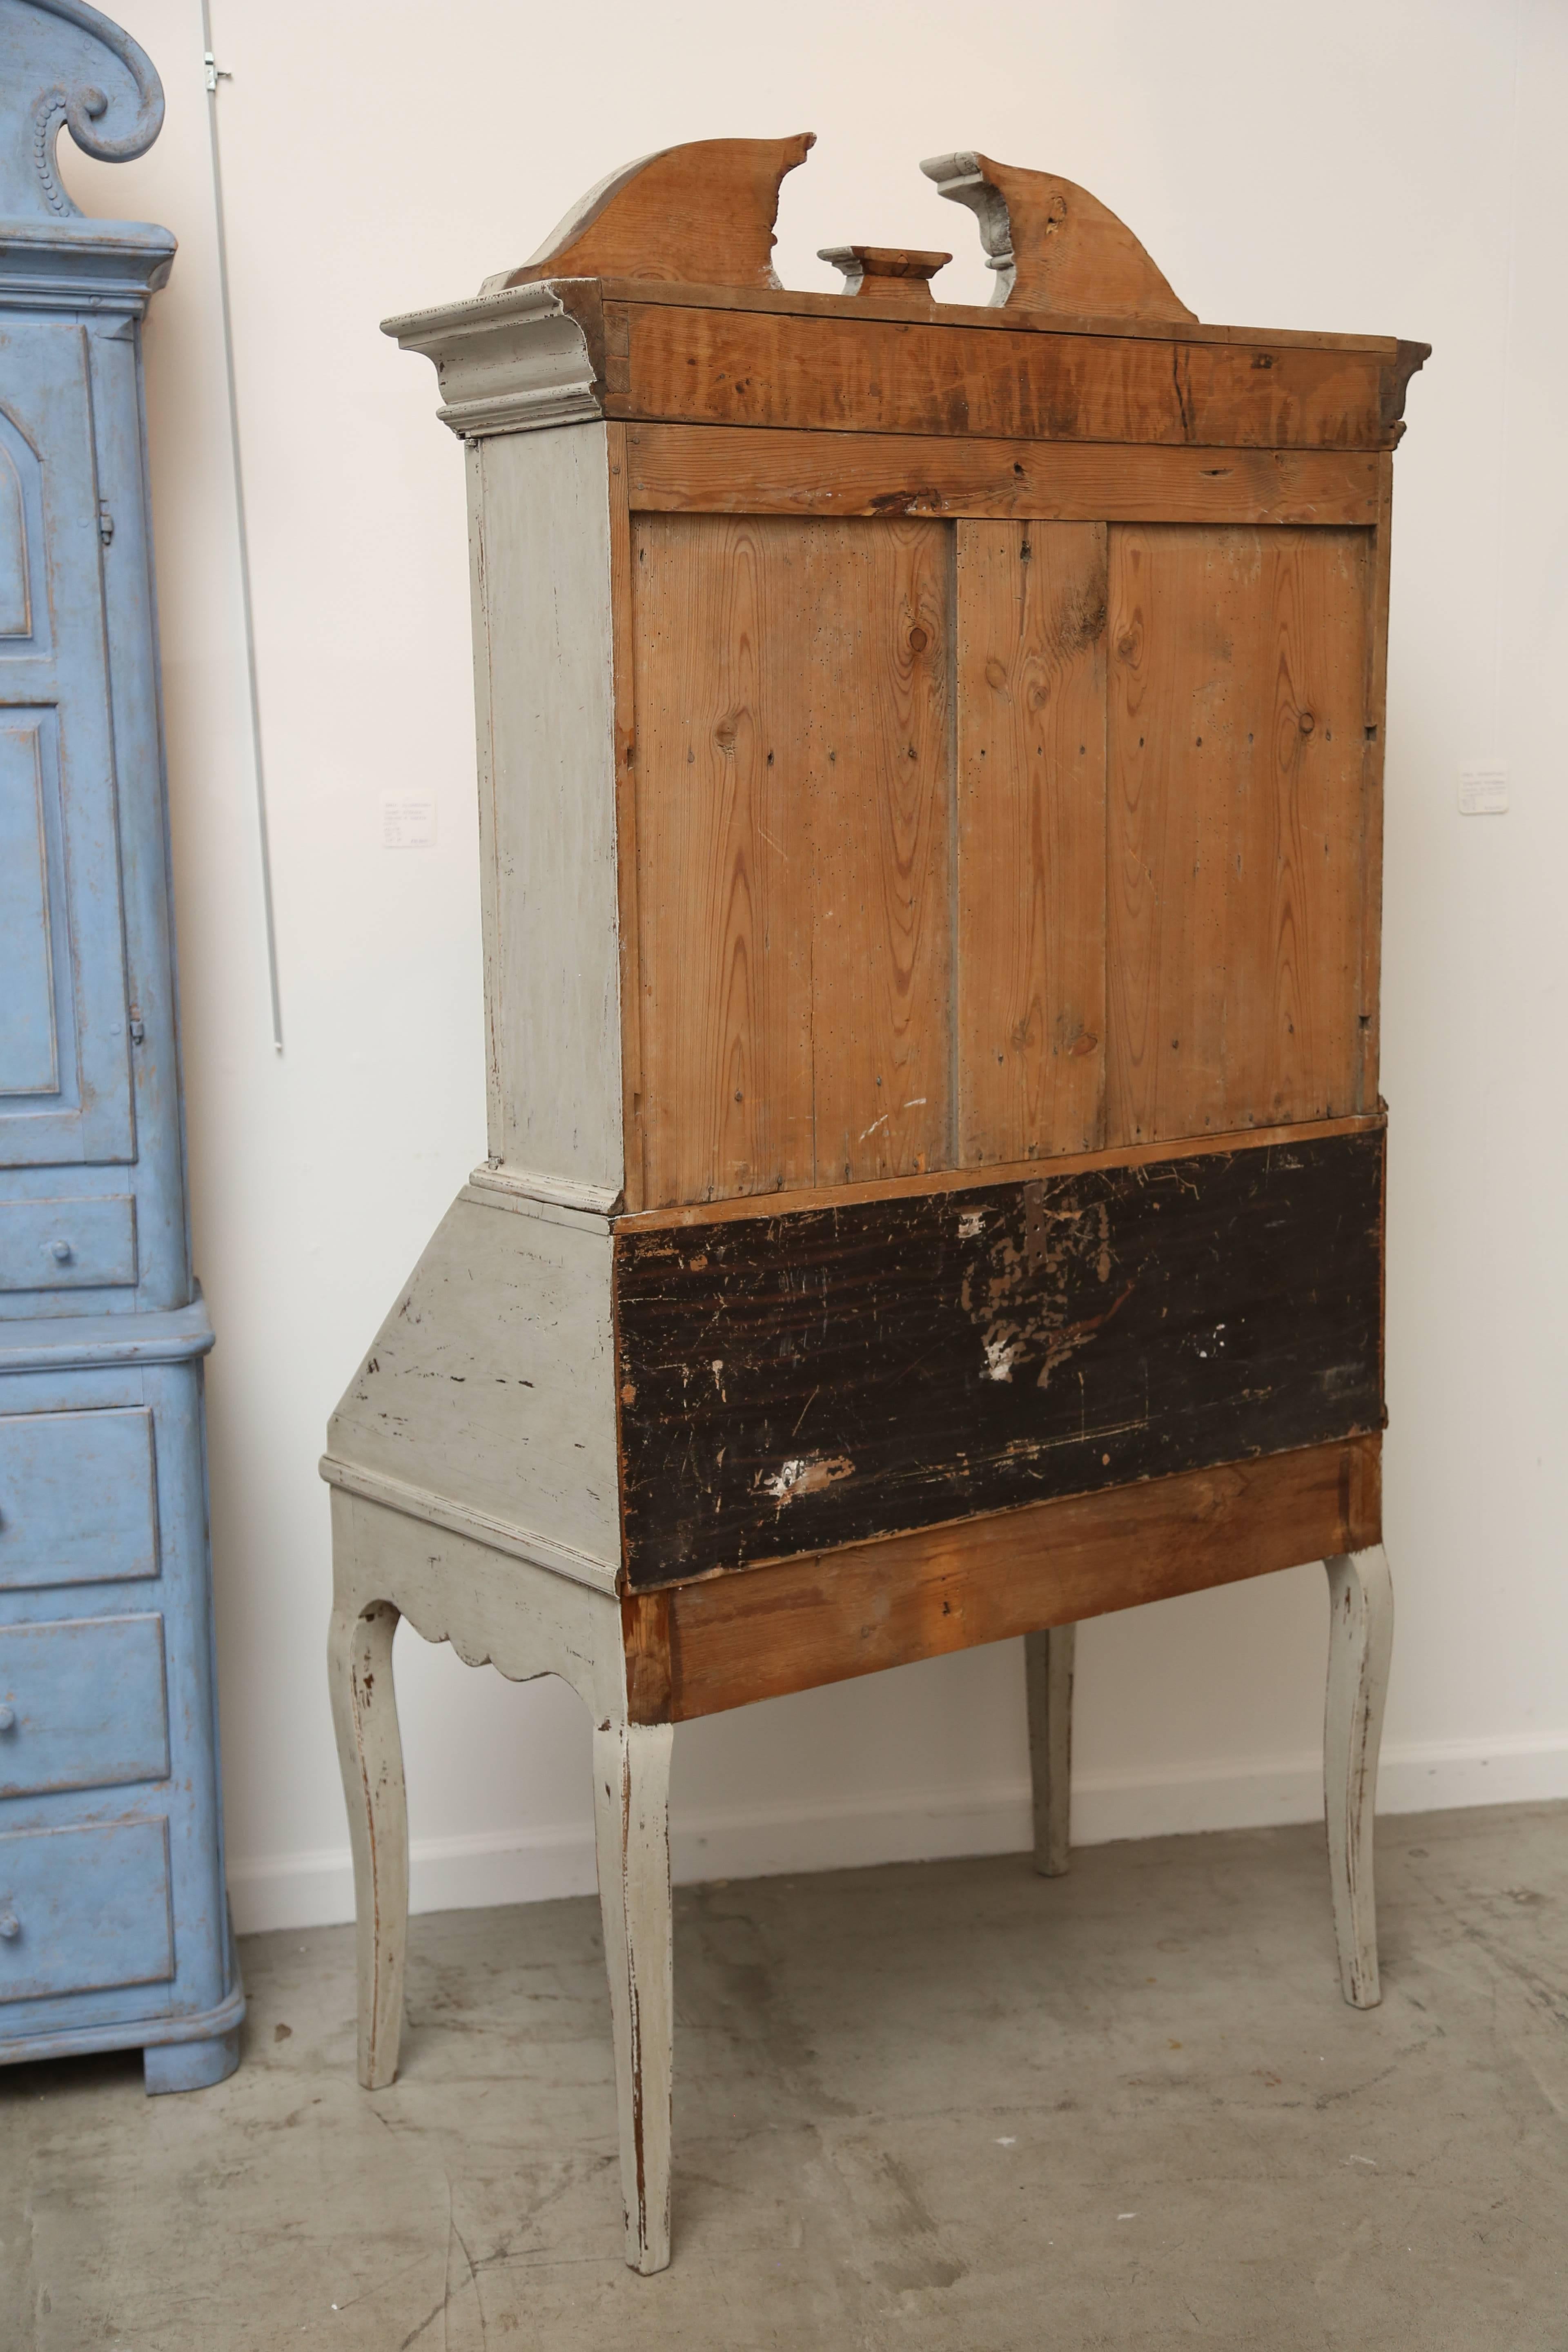 Antique Swedish baroque secretary display cabinet late 18th century

The Secretary is in two sections, painted in a lovely Swedish distressed gray color.
The upper section has an impressive arched cornice with opening in the center
and a vase shape